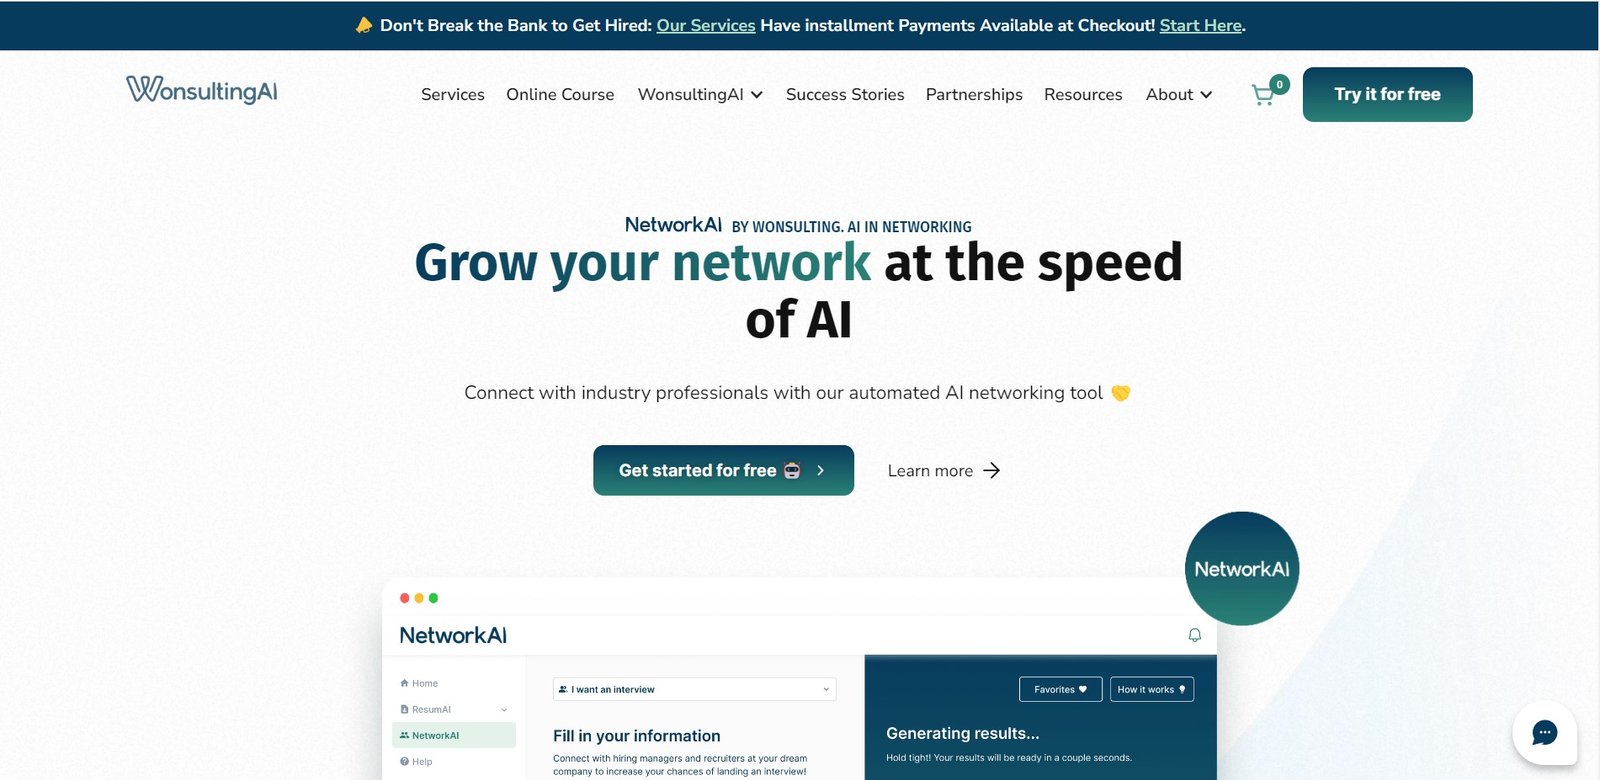 NetworkAI is an AI networking tool that transforms your LinkedIn networking with AI-crafted introduction messages